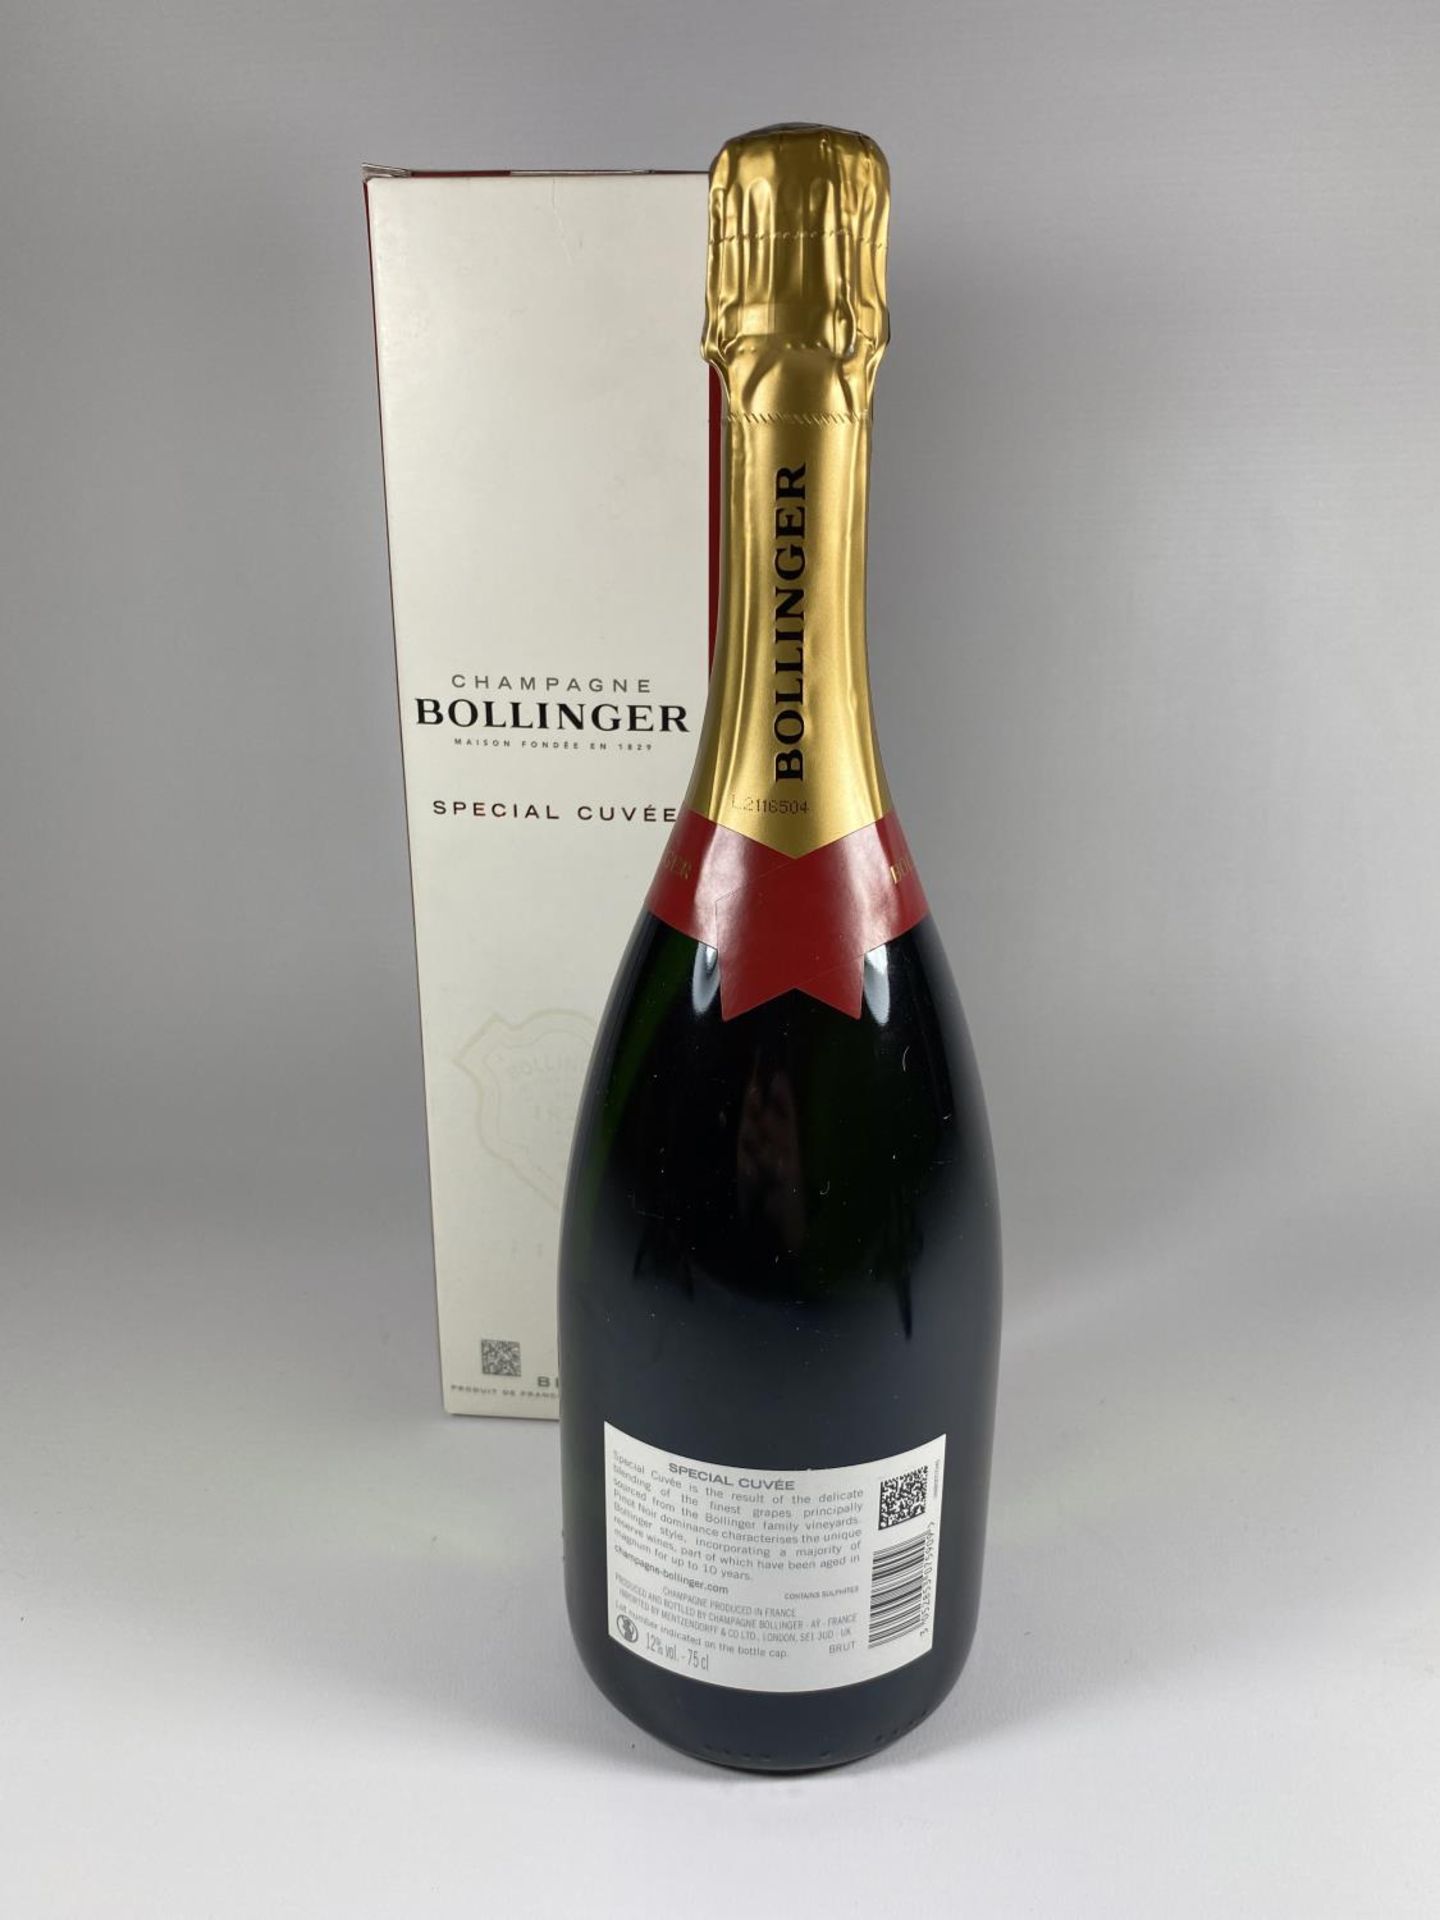 1 X 75CL BOXED BOTTLE - BOLLINGER SPECIAL CUVEE CHAMPAGNE - Image 3 of 3